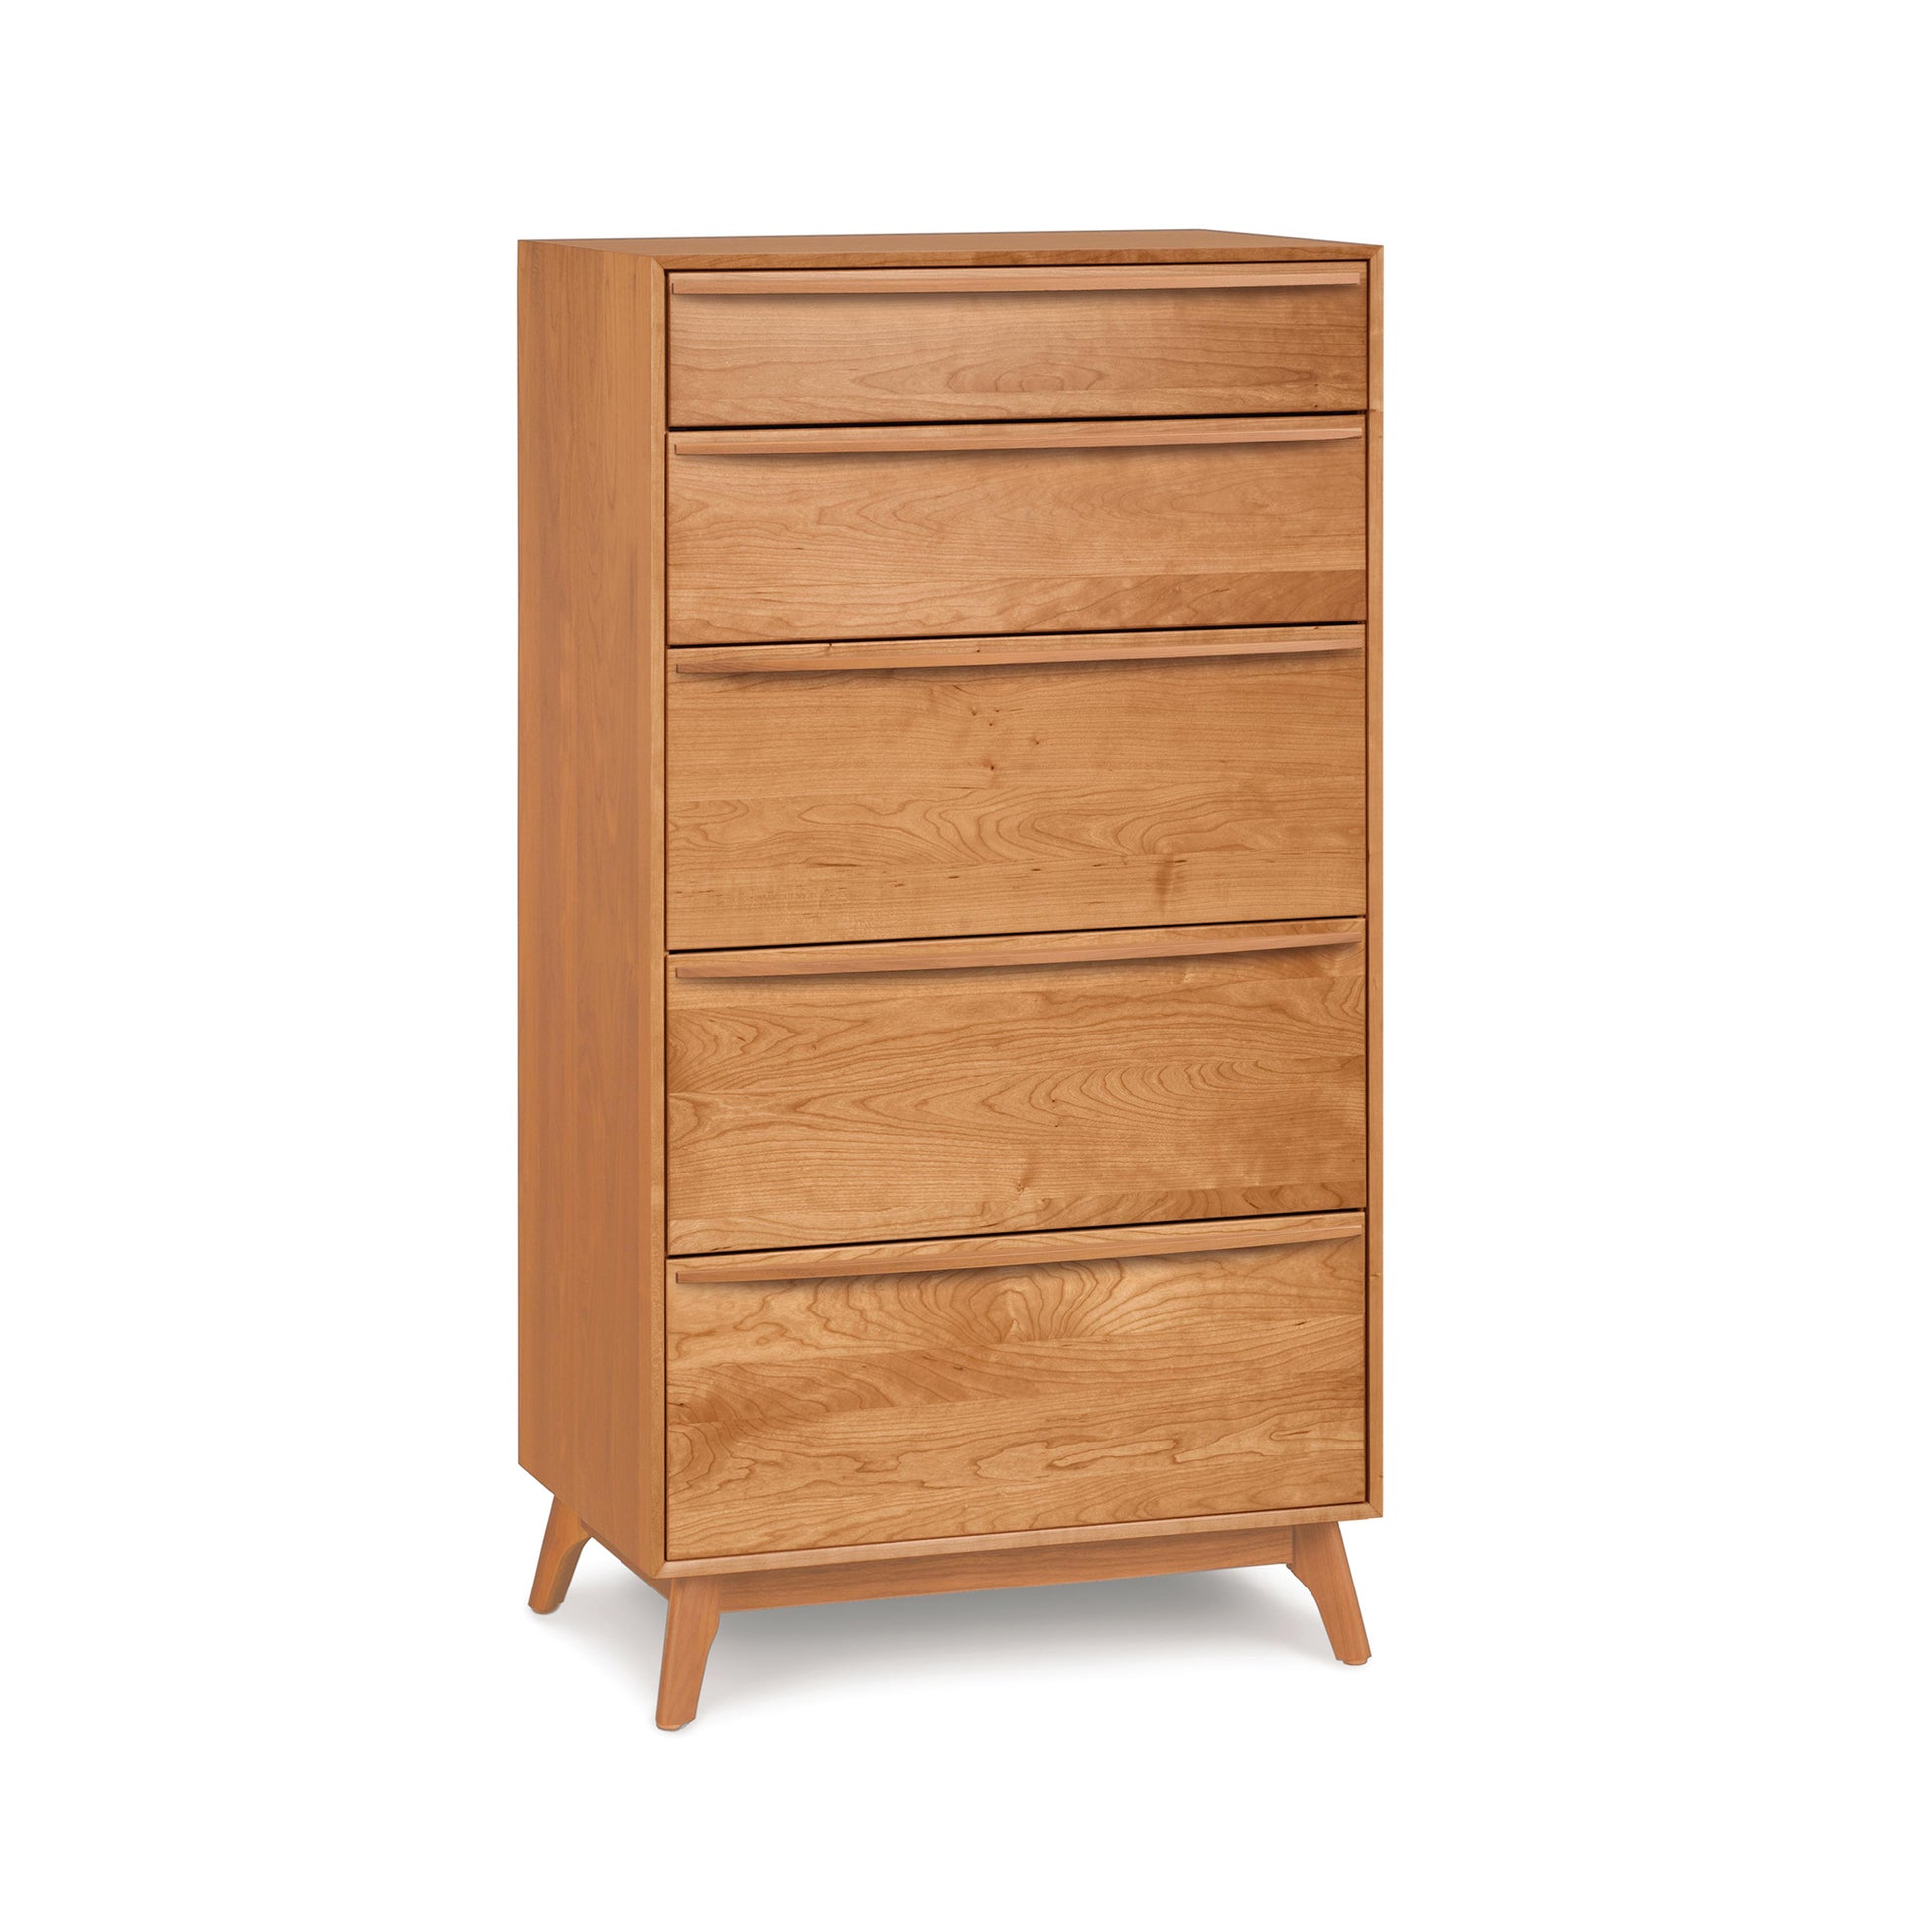 The Copeland Furniture Catalina 5-Drawer Chest is a stunning example of solid wood construction in the realm of bedroom furniture. Resting on a white background, this wooden chest of drawers exudes timeless elegance.